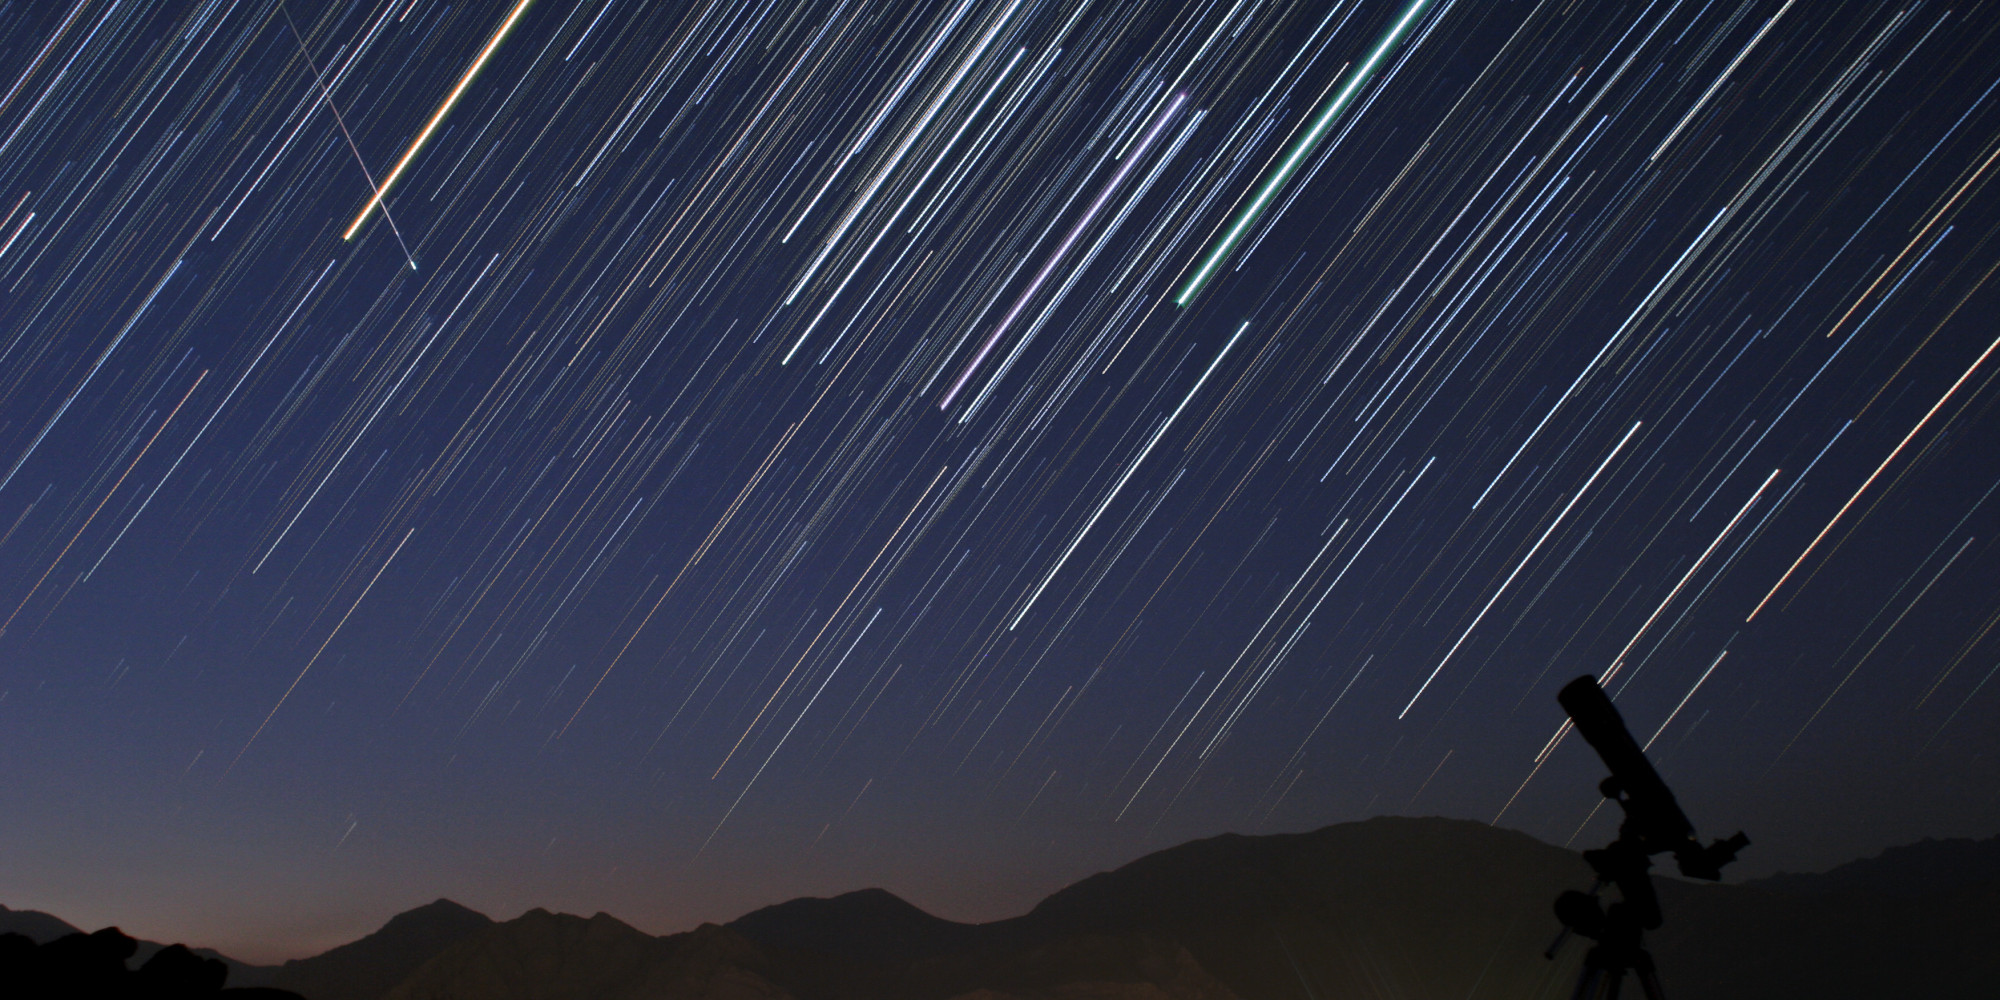 UNSPECIFIED - SEPTEMBER 07: A bright meteor during Perseid meteor shower (Aug. 12) is captured in a star trail image of constellation Orion. (Photo by Babek Tafreshi/SSPL/Getty Images)